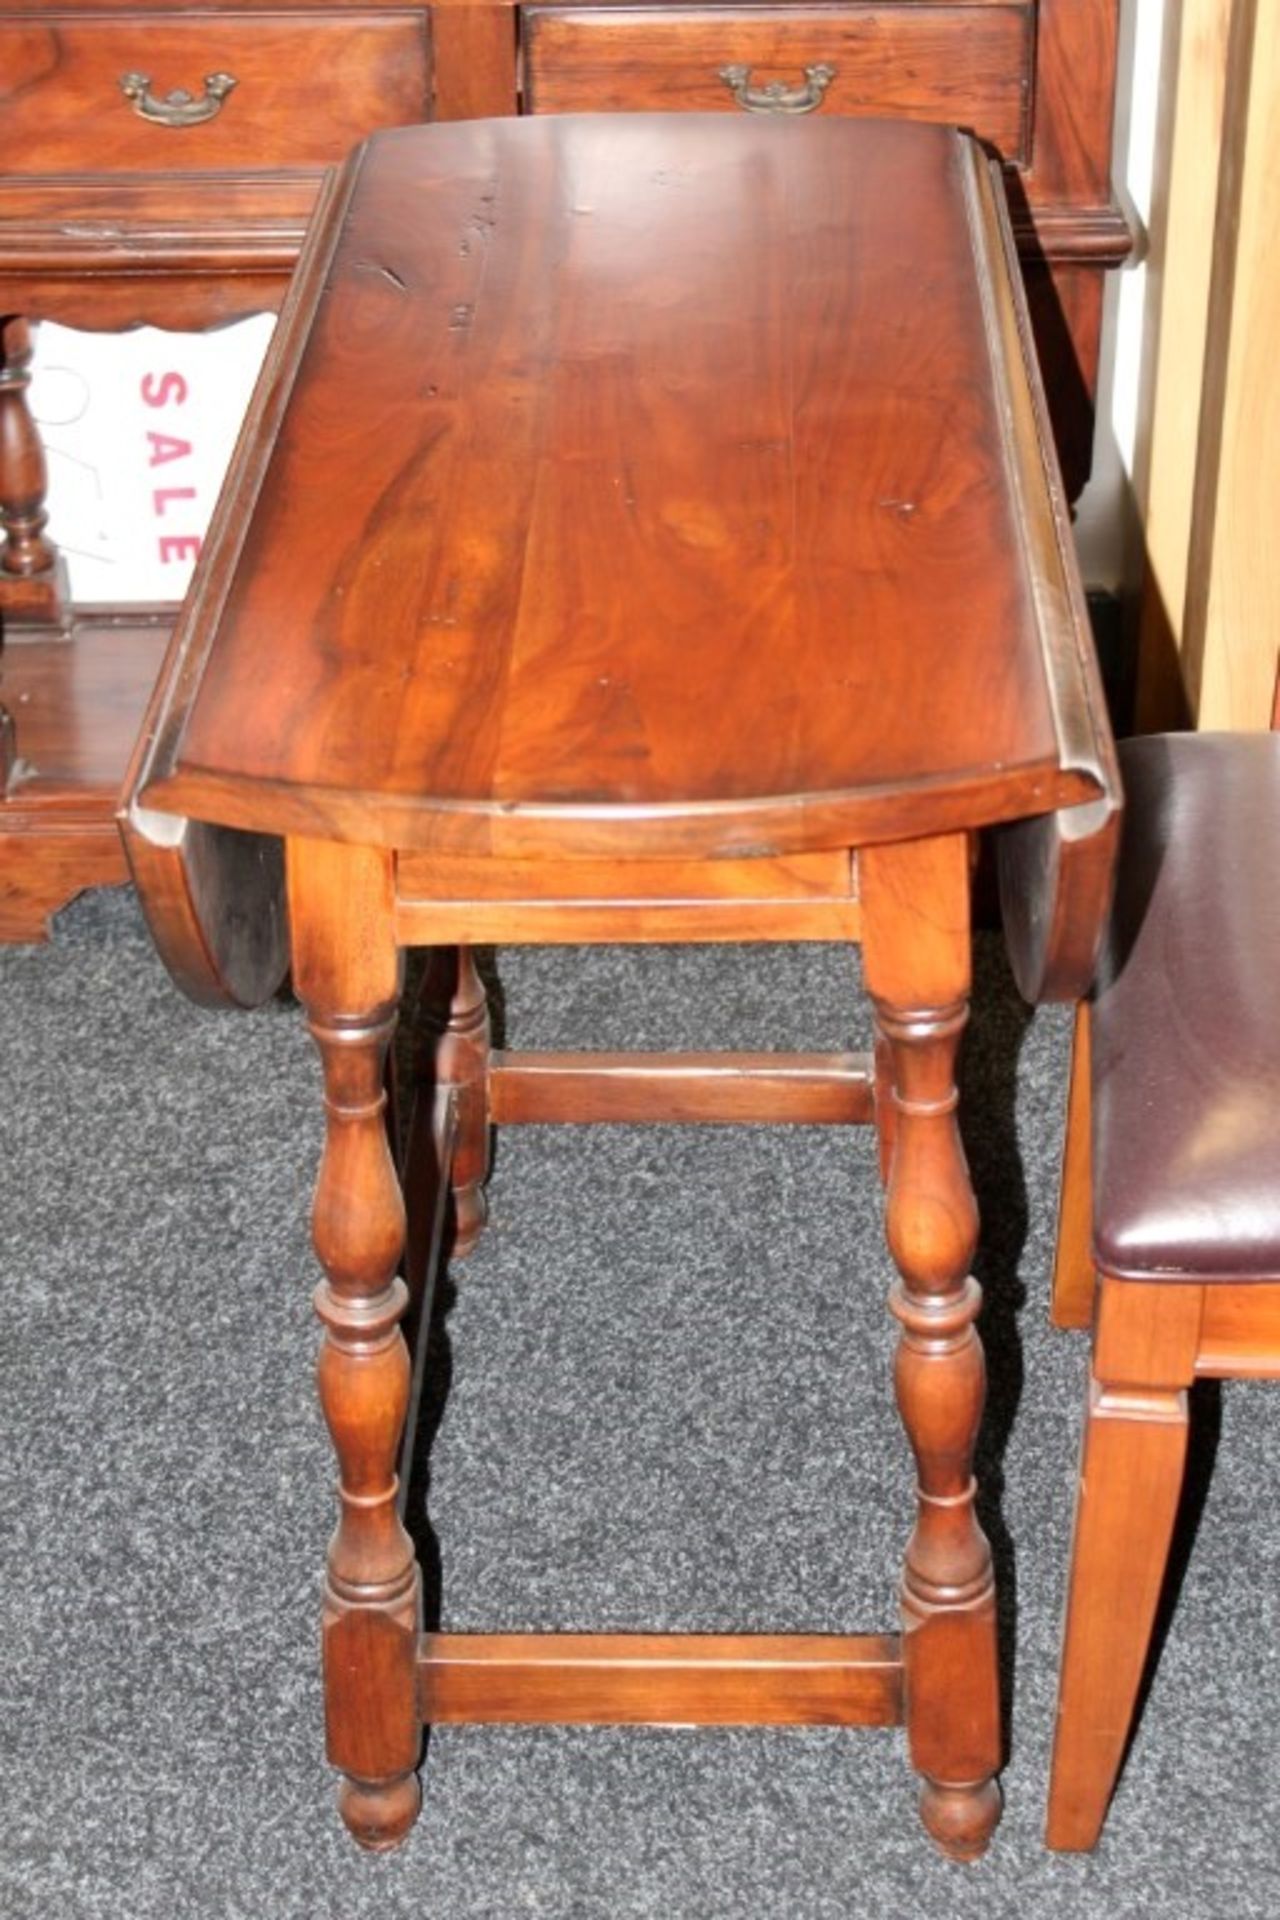 1 x Mark Webster "Burlington" Solid Wood Gate Leg Extending Table With 2-Drawers + 2-Folds - Diamete - Image 7 of 14